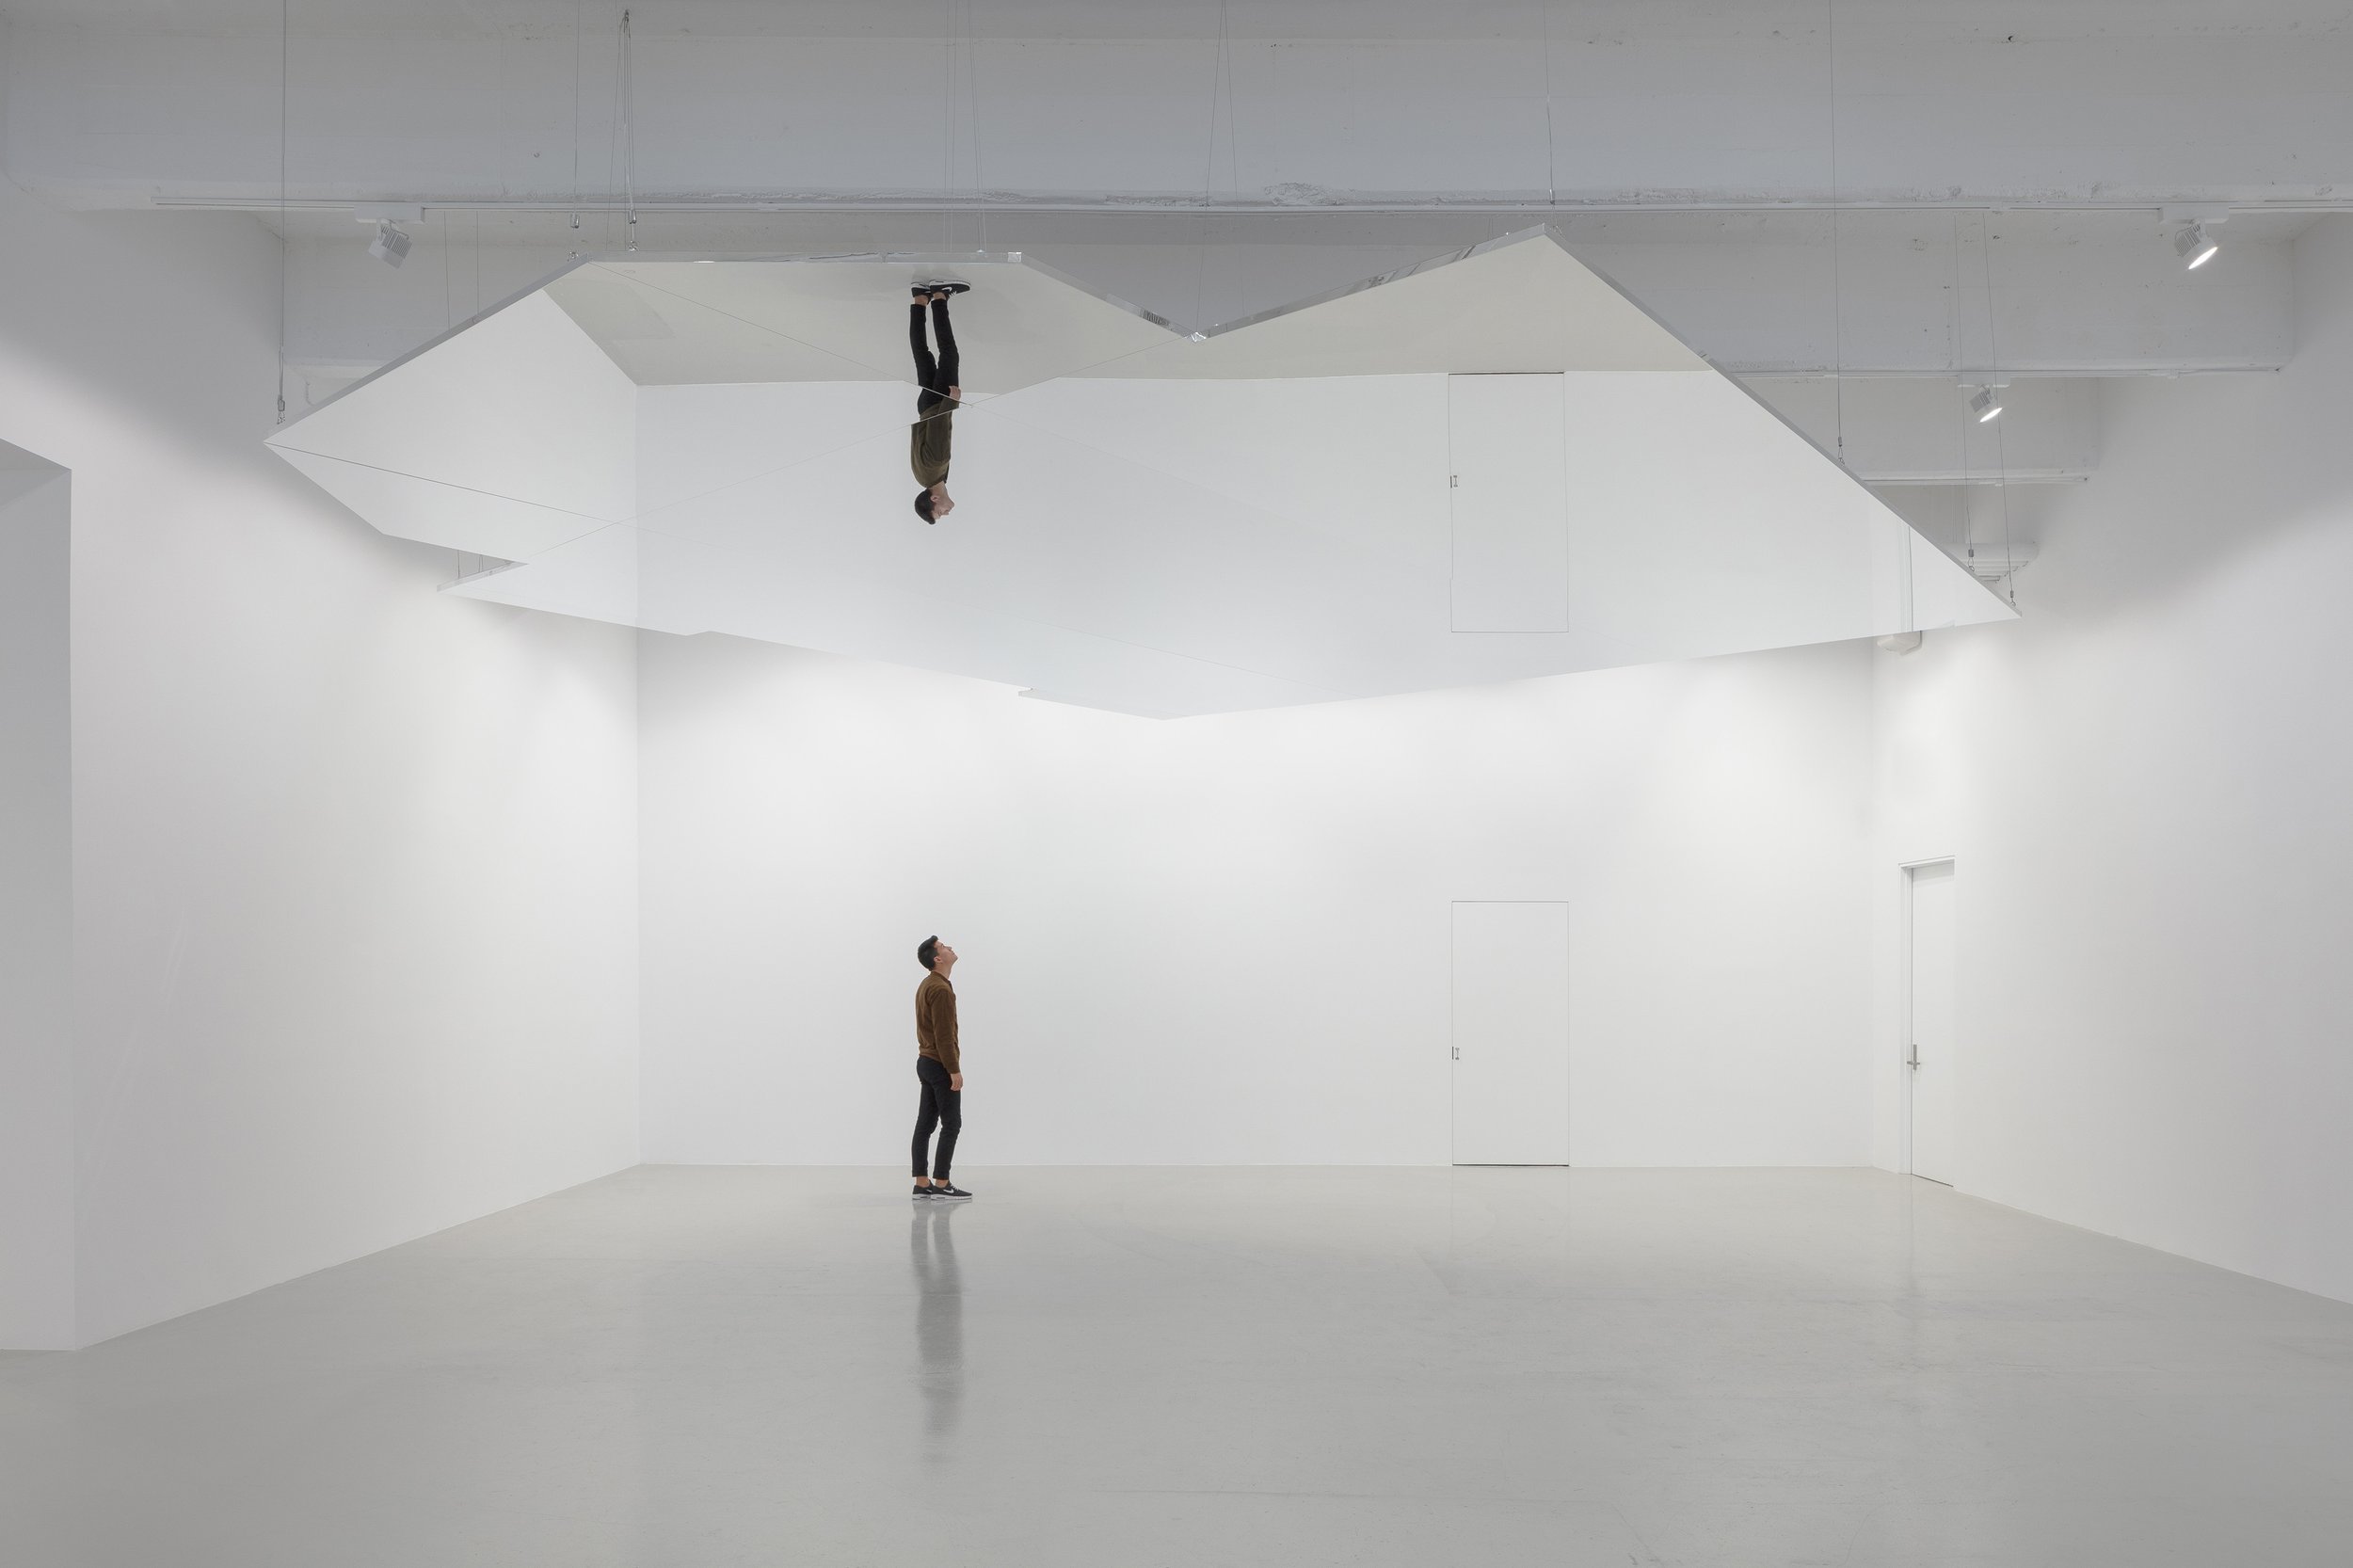  Mark Wallinger: Study for Self Reflection  Hauser &amp; Wirth  